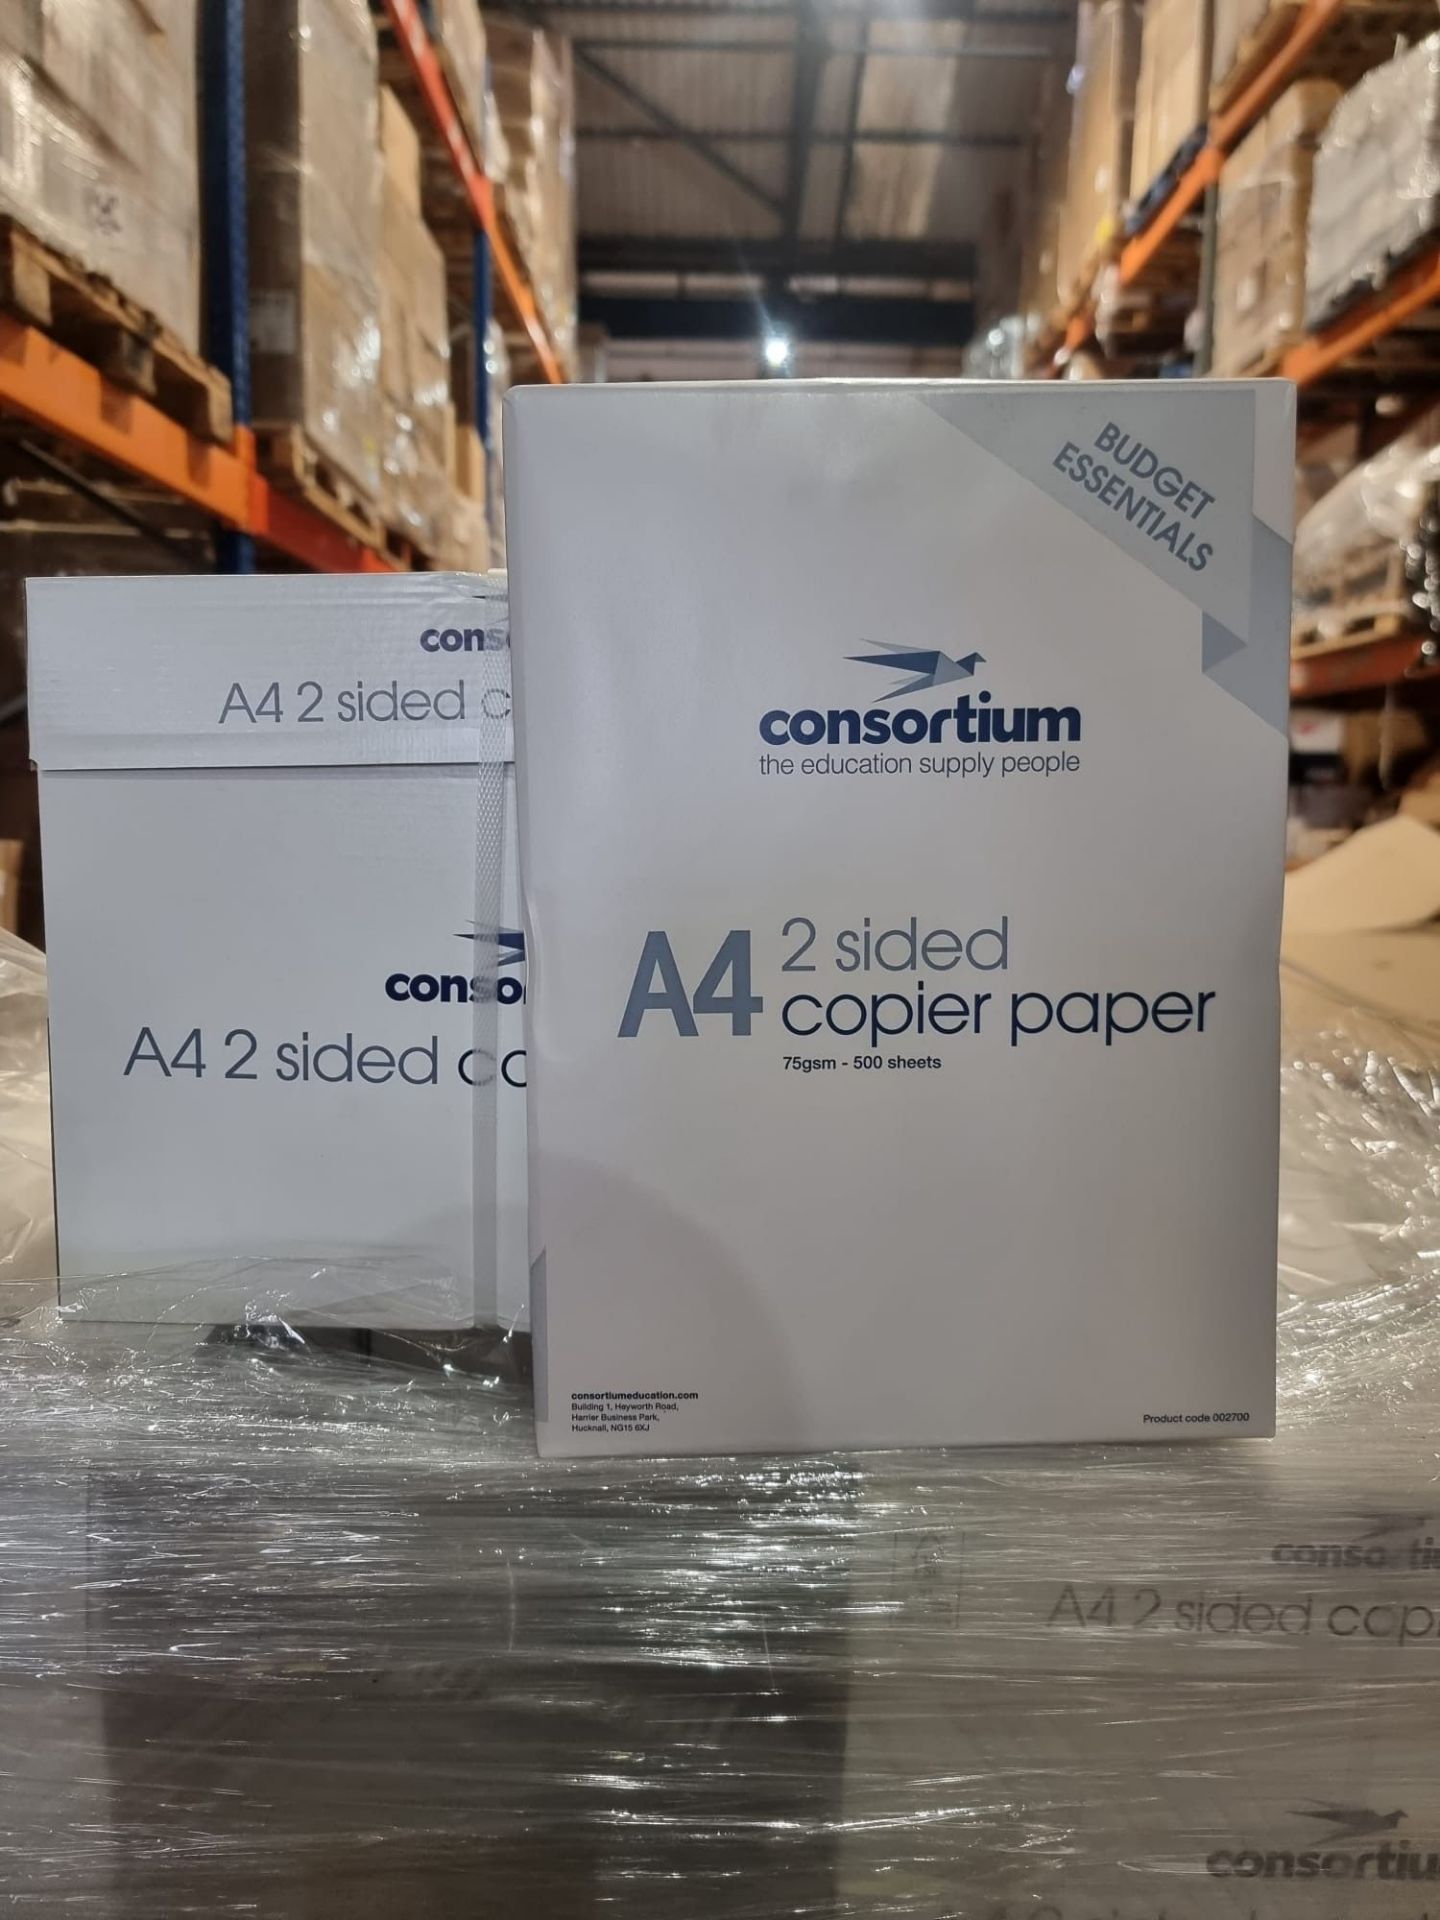 TRADE LOT 100 x New Reems of 500 75GSM Consortium A4 Double Sided Copier Paper